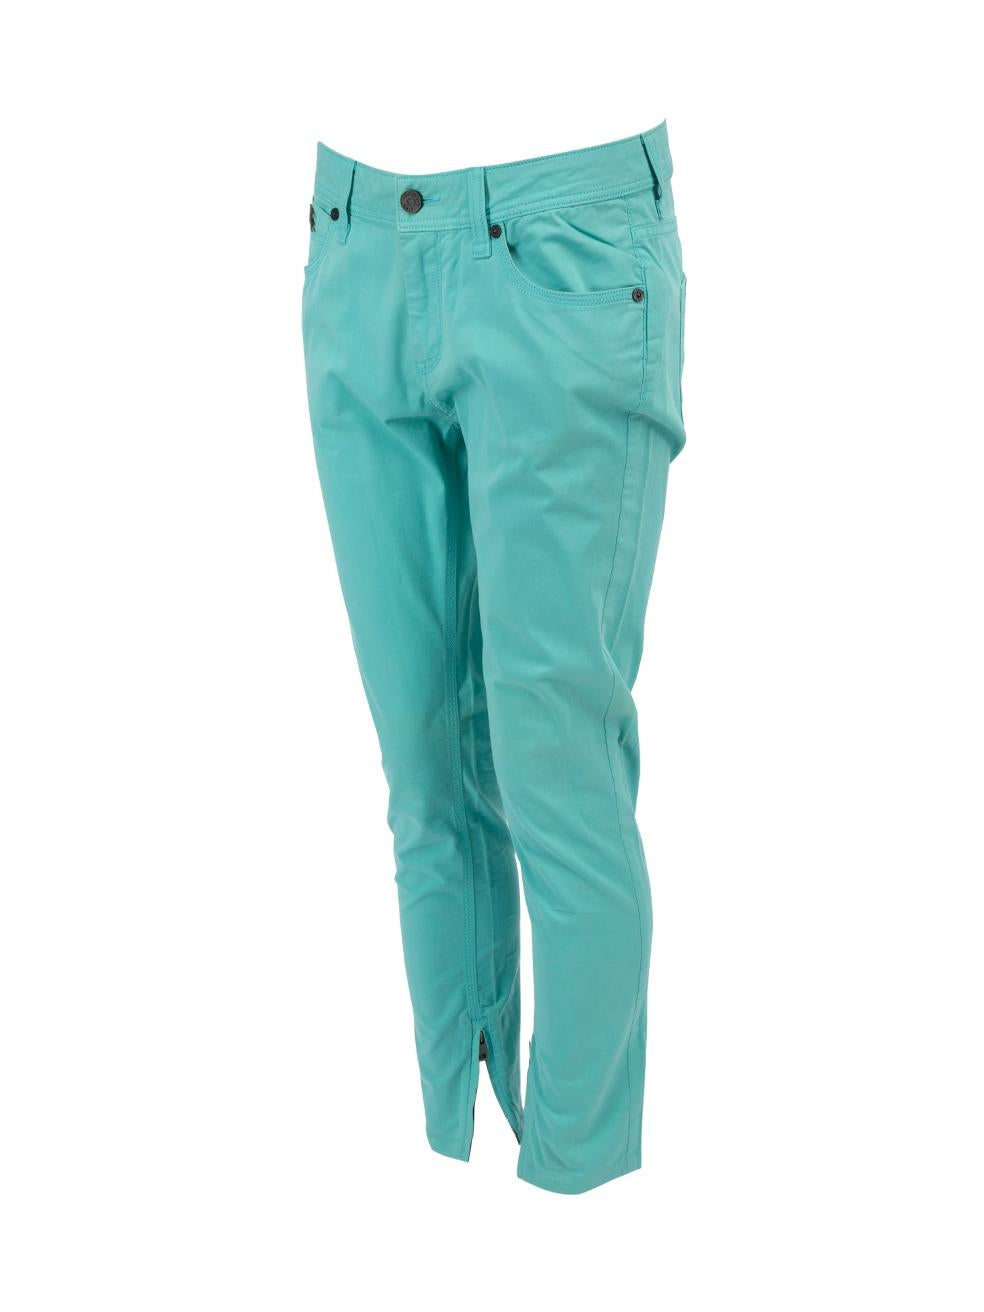 Burberry Women's Burberry Brit Turquoise Bayswater Skinny Ankle Zip Trousers 1